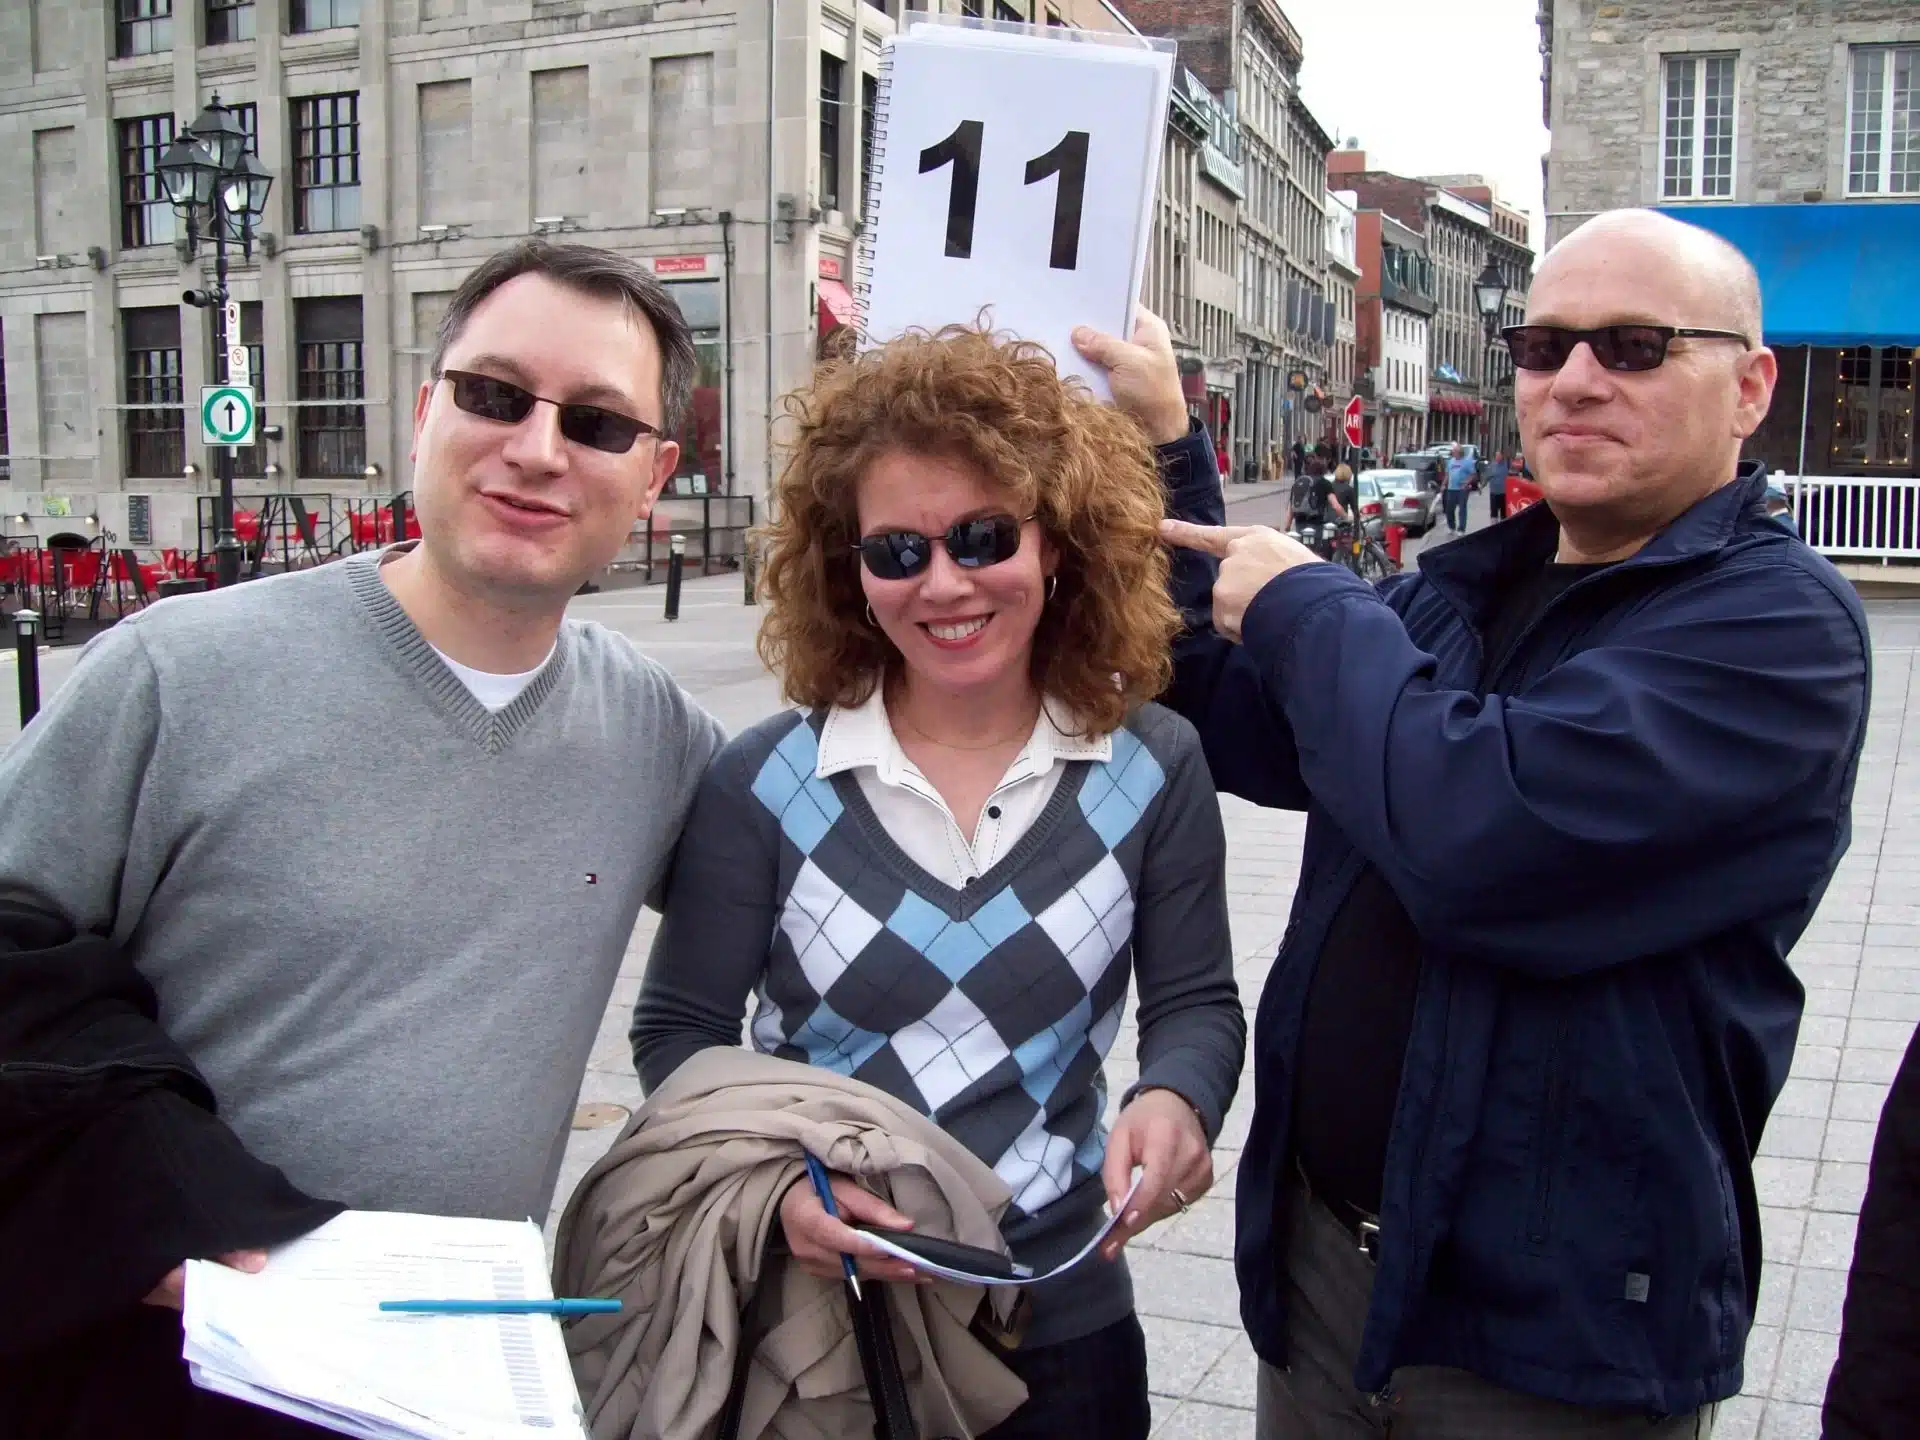 Three people, one with a large number 11 above her head.